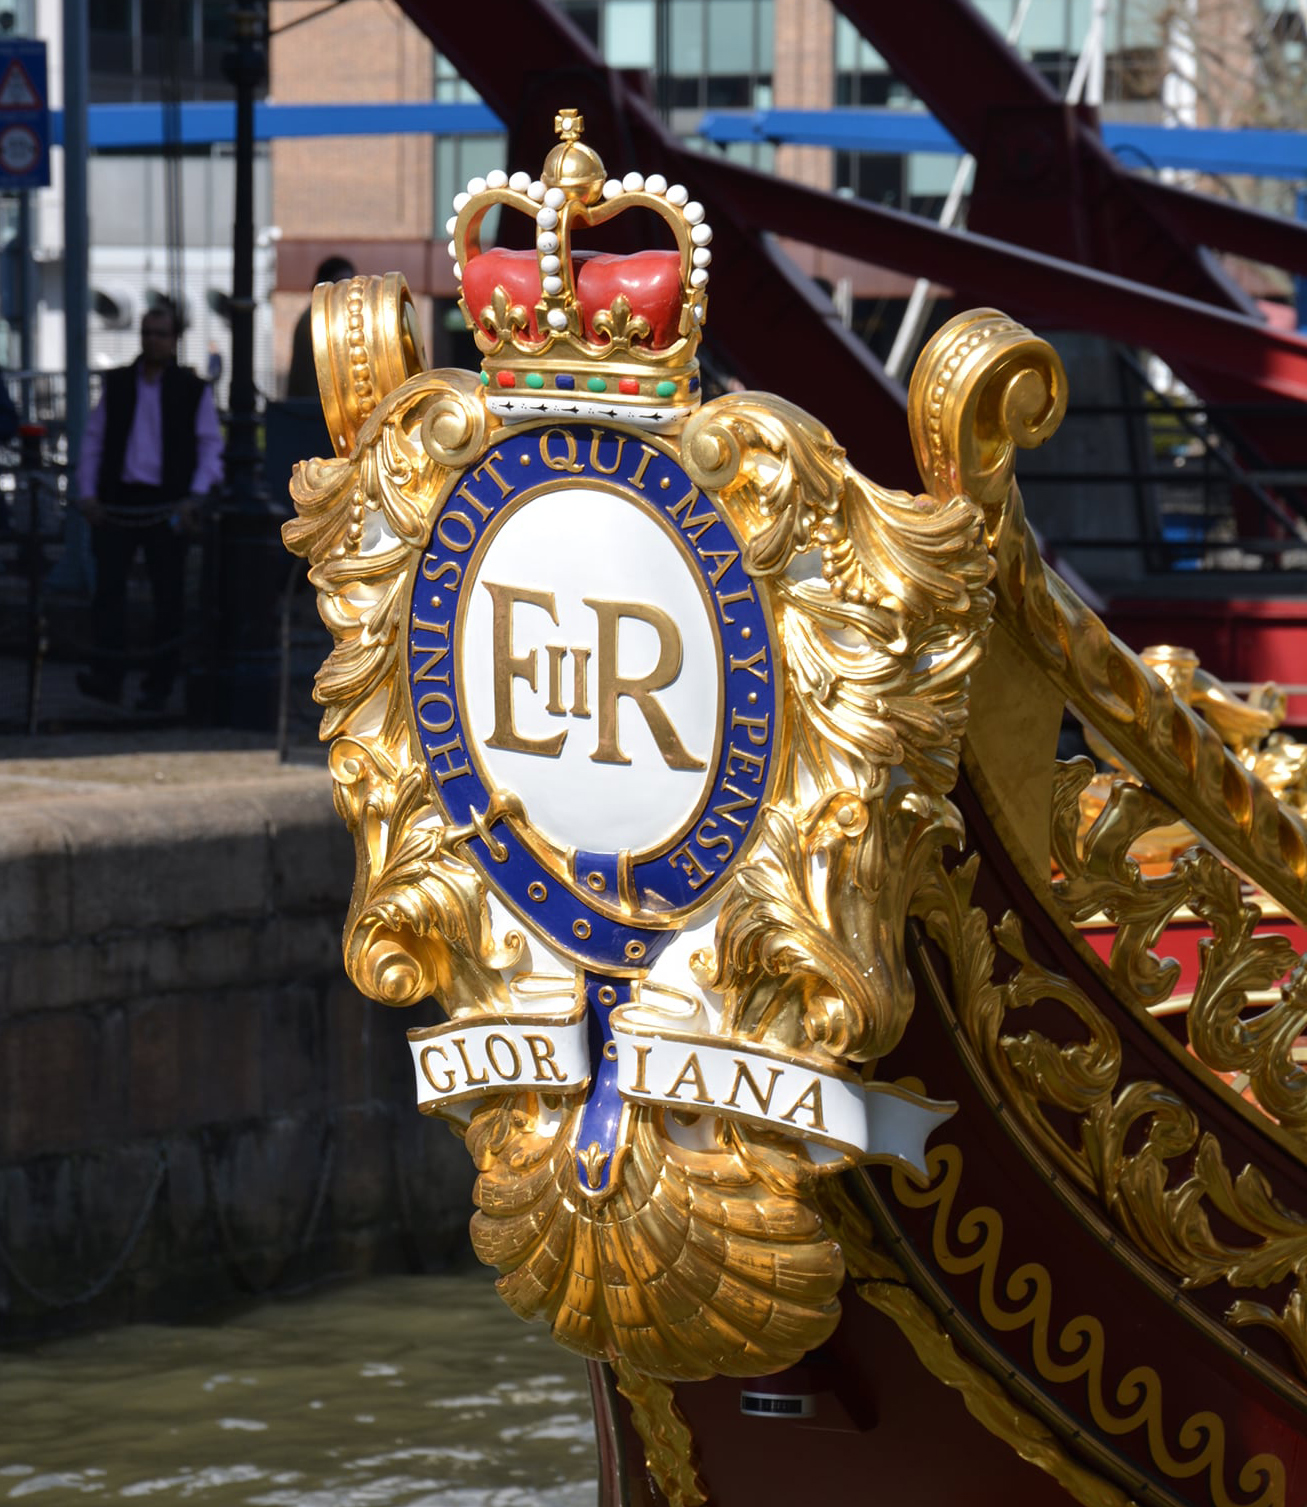 GLORIANA, THE QUEEN'S ROWBARGE